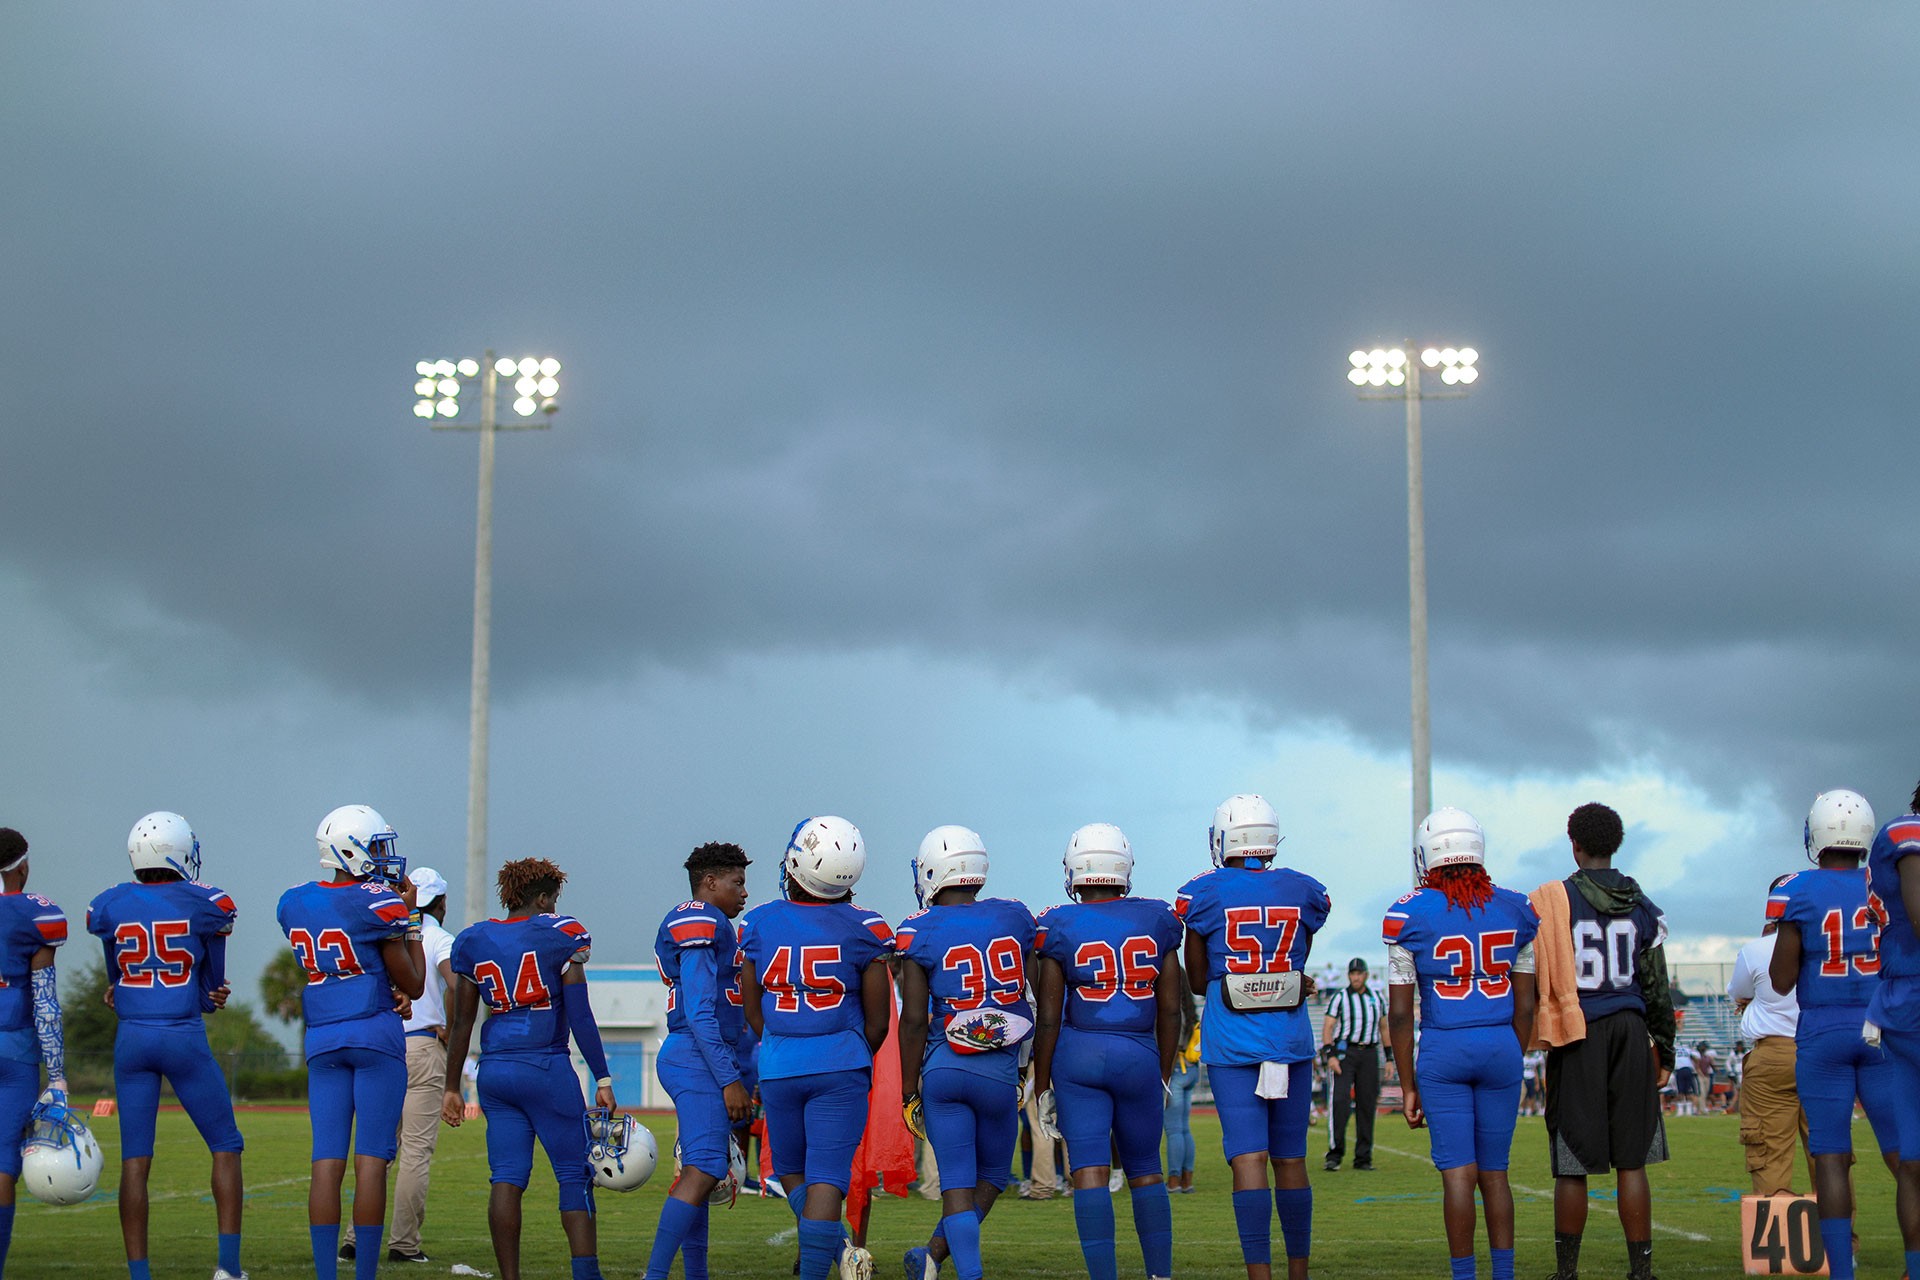 Young men in football uniforms lined up